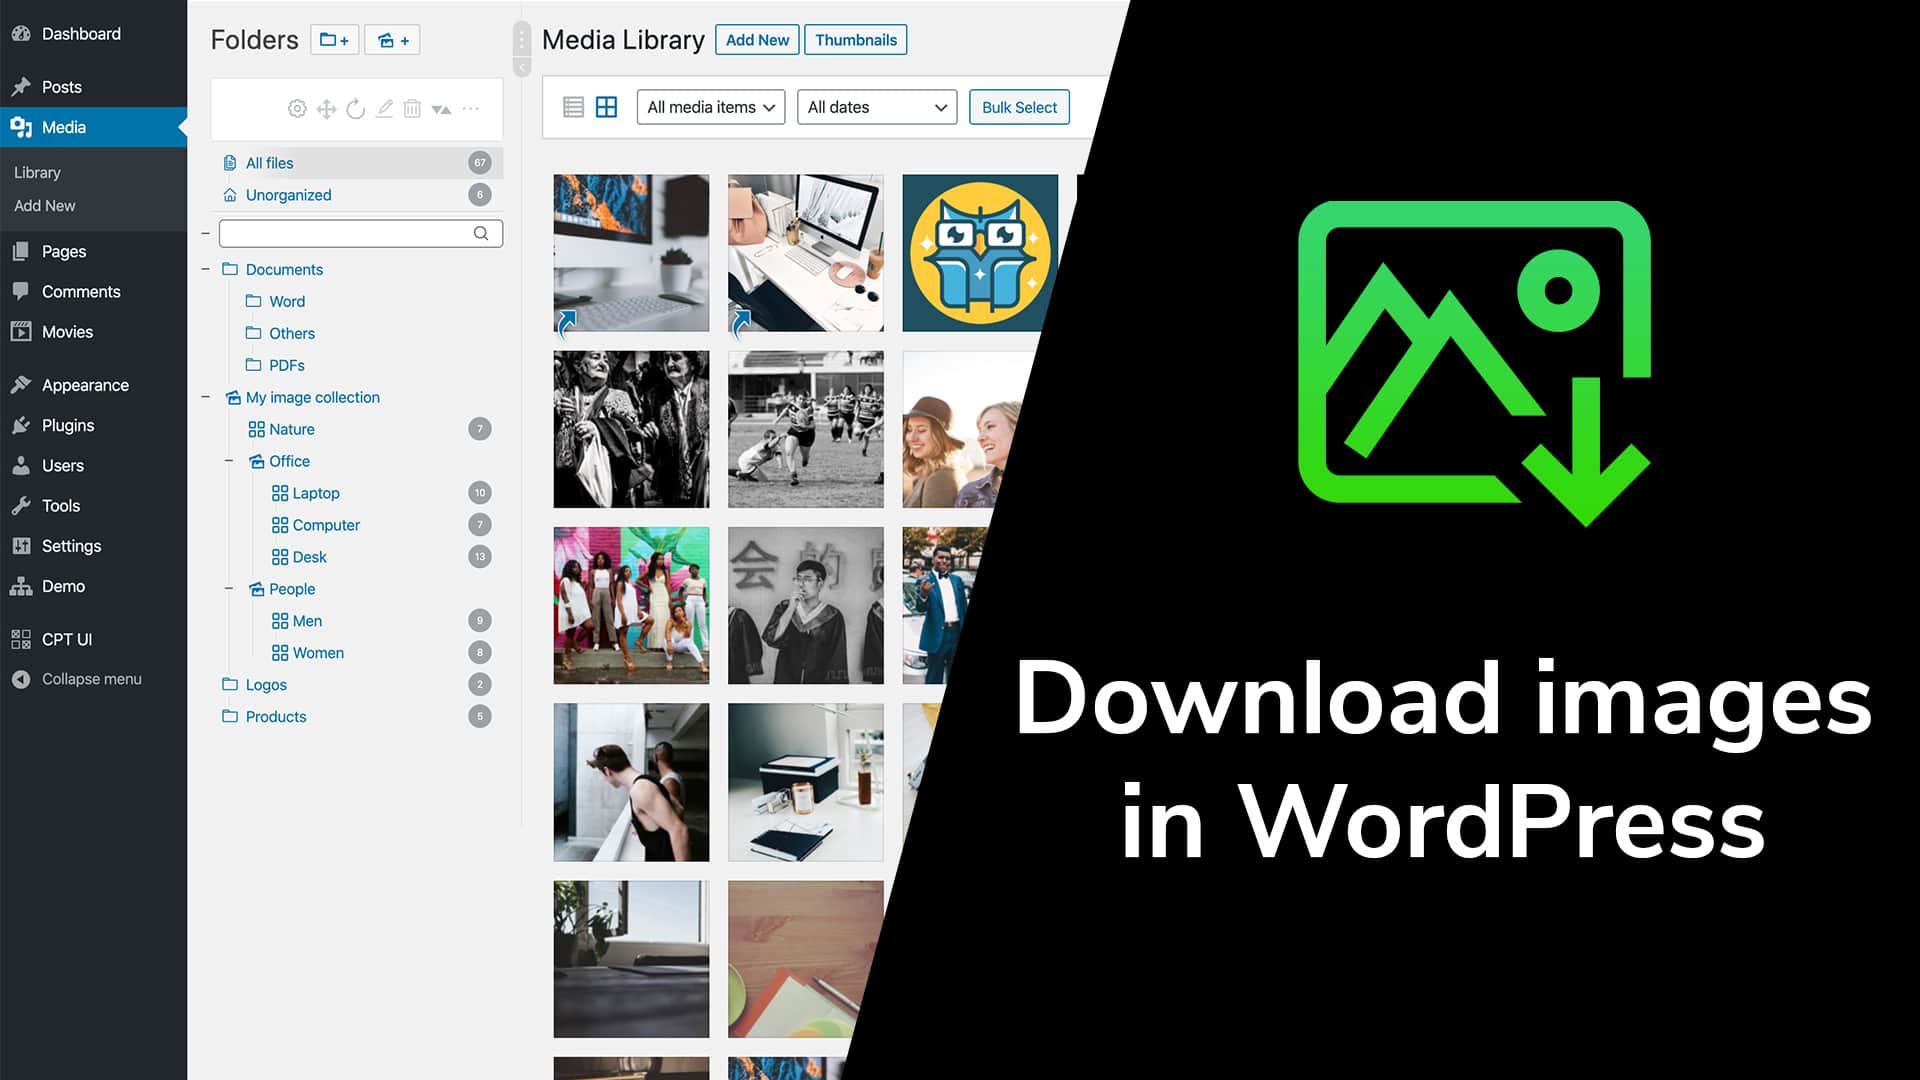 How To Download Media From WordPress